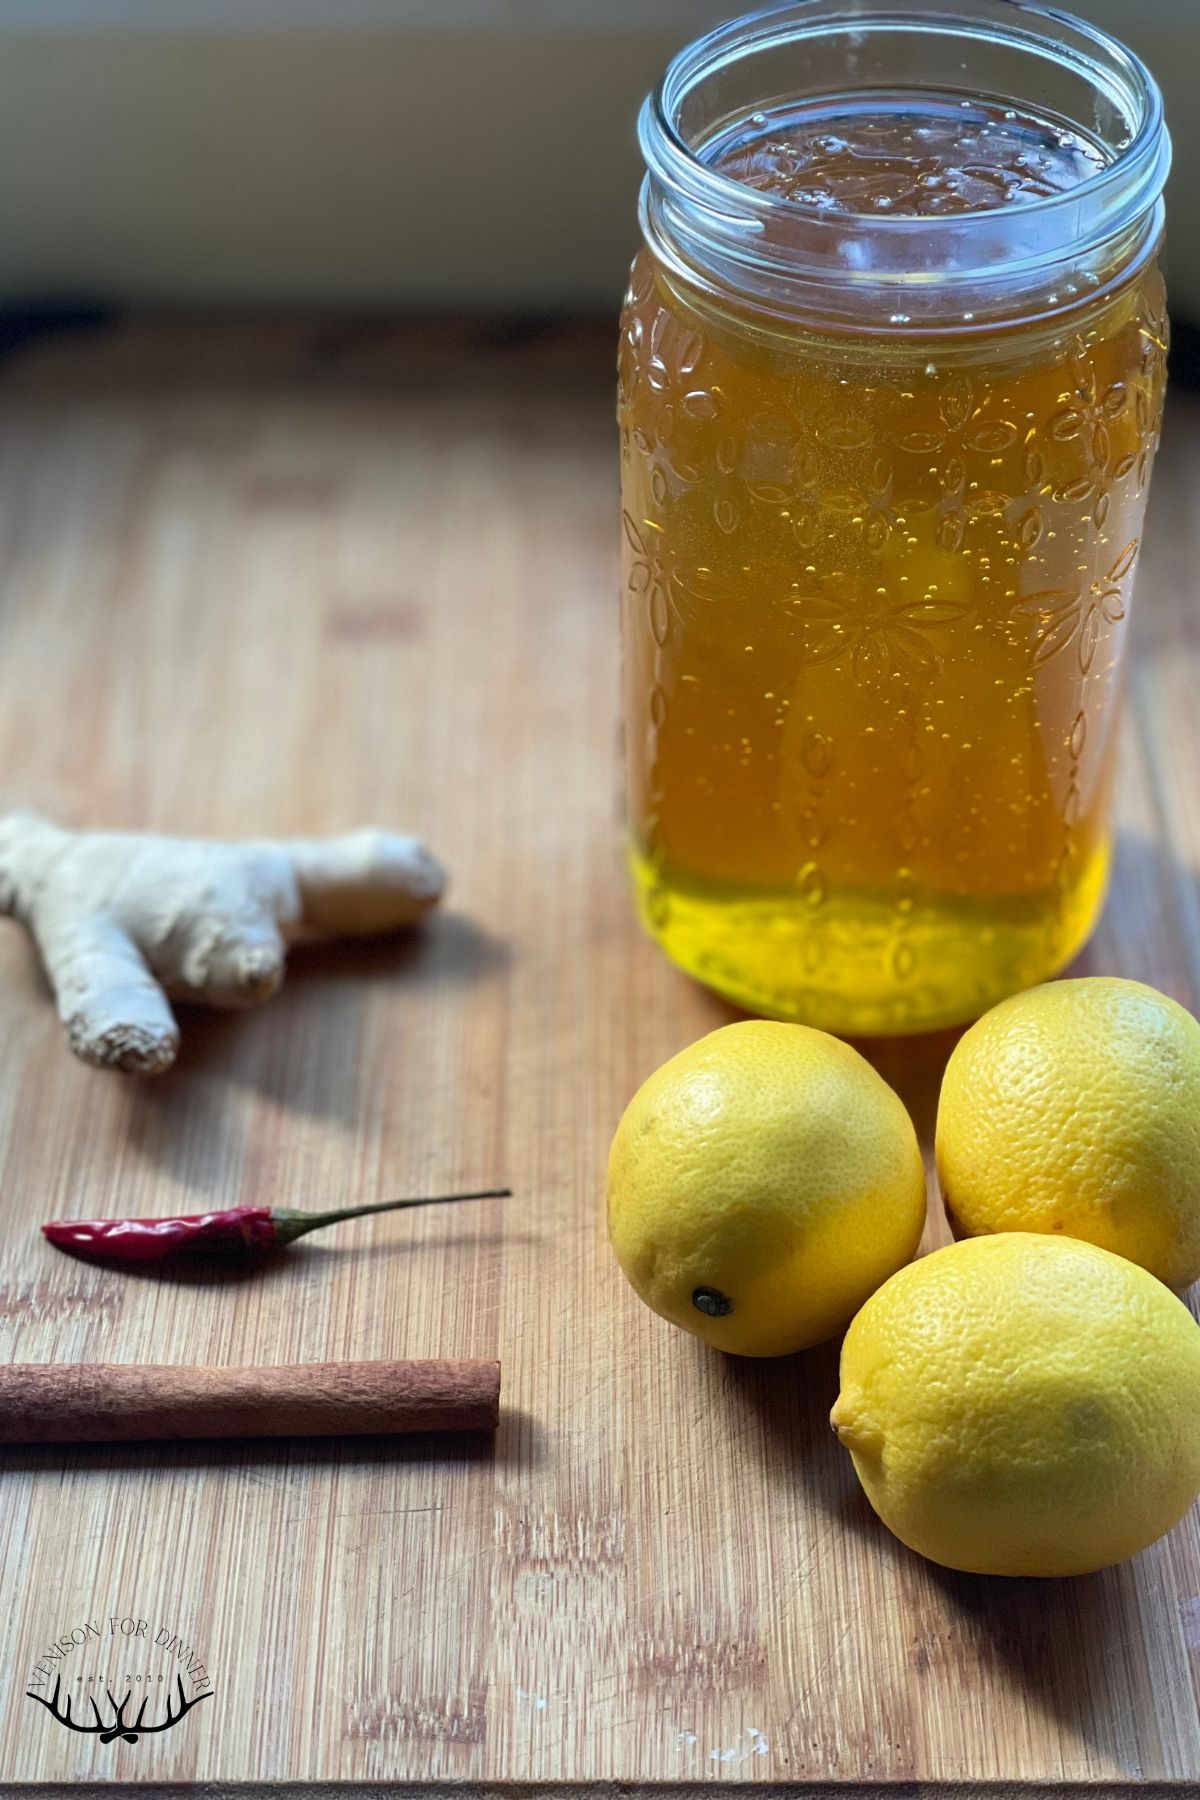 Ingredients to make fermented lemons on a wooden board.